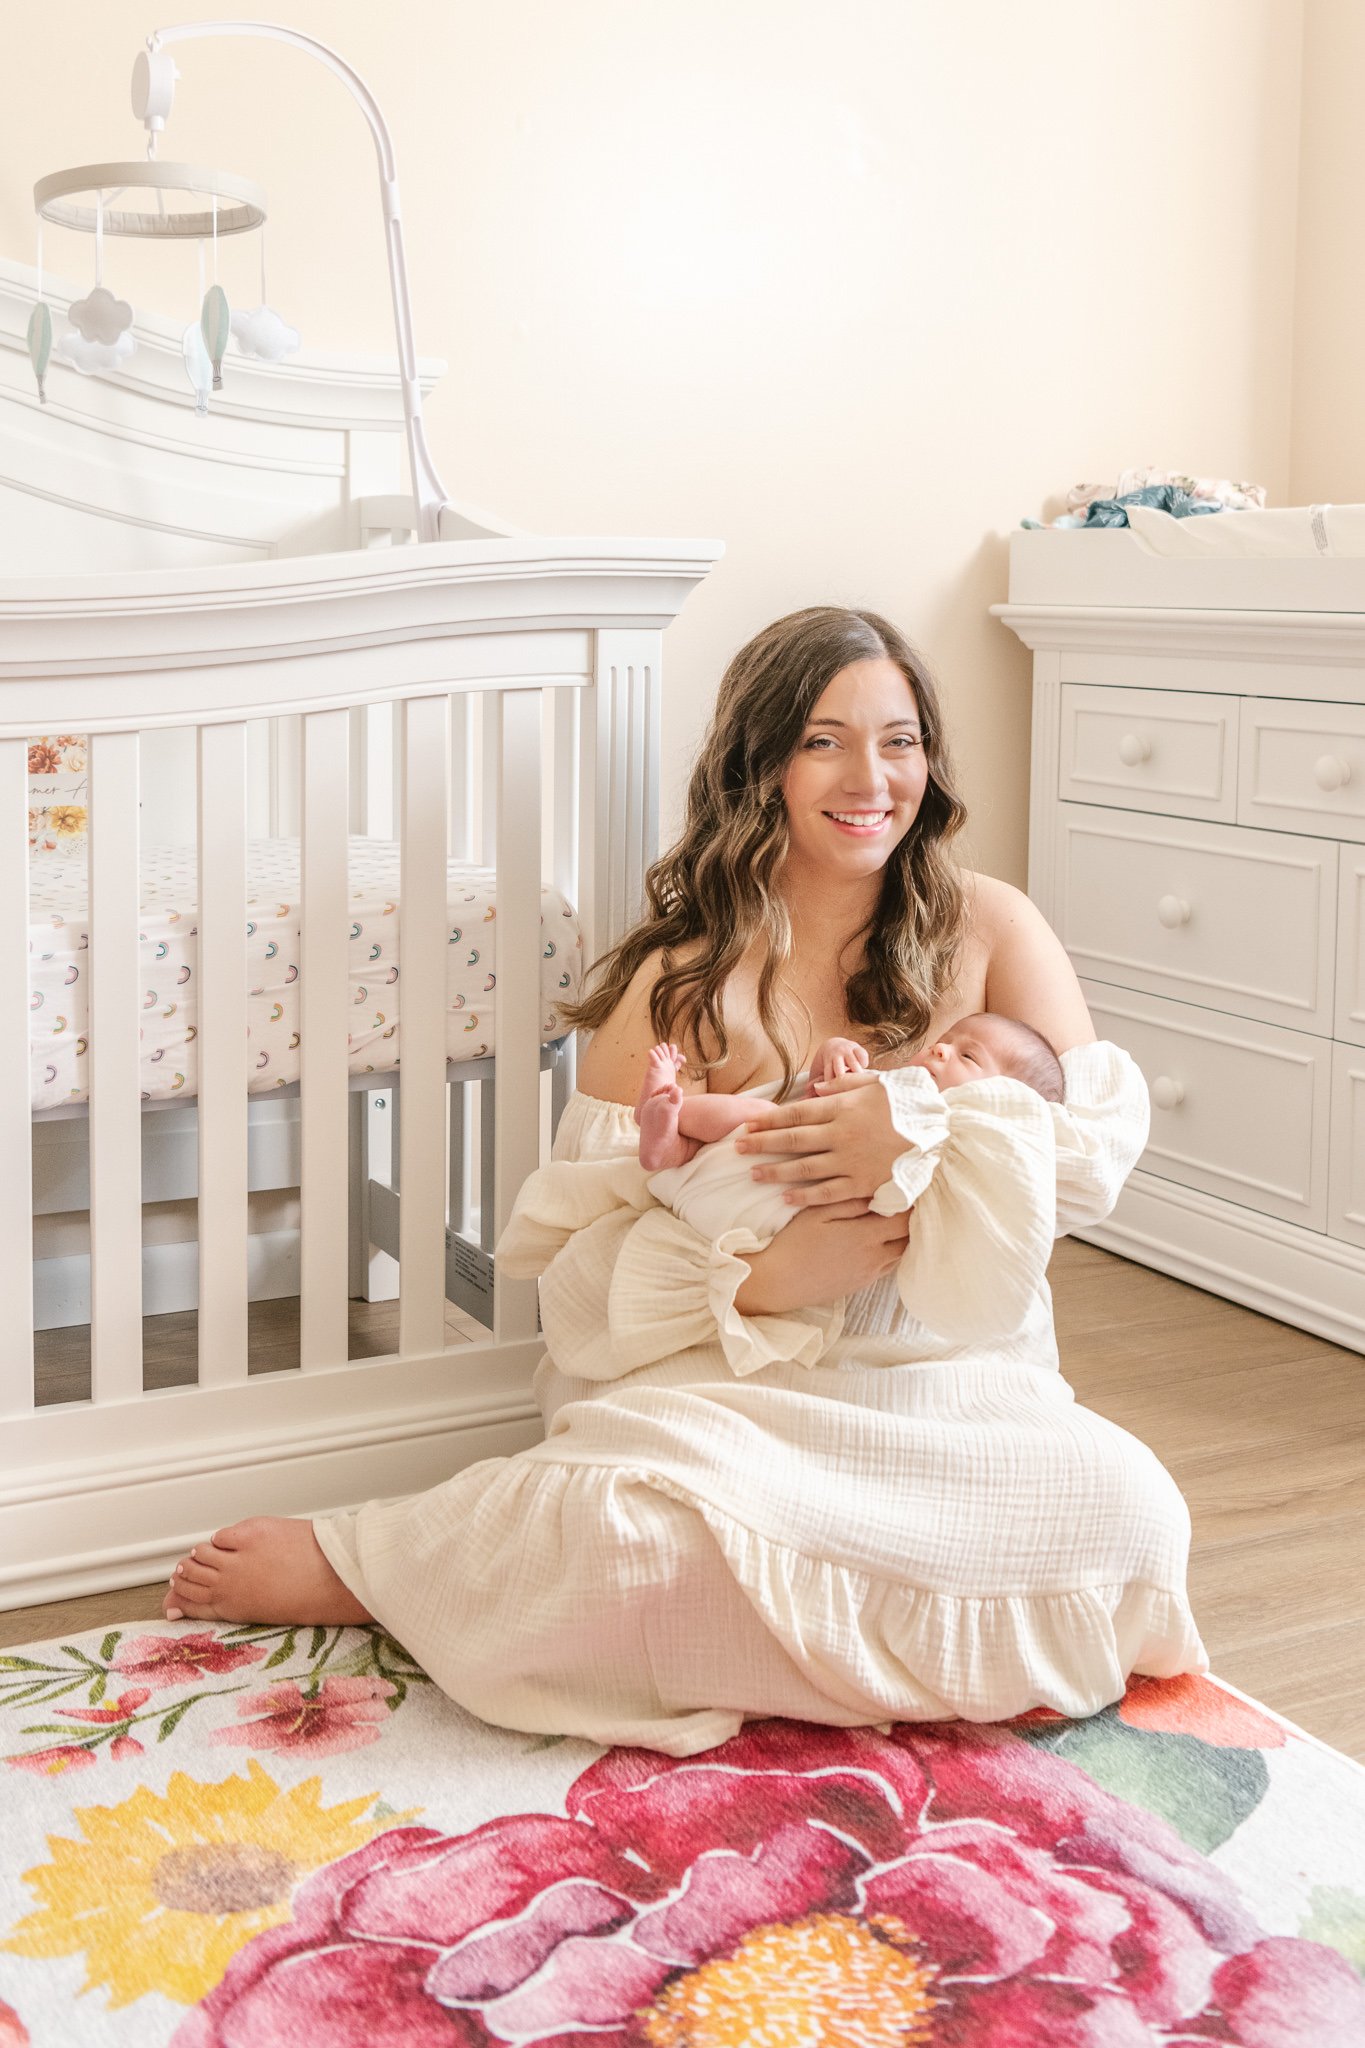  A new mother smiles as she holds her baby girl in her arms sitting on the floor of her nursery by Nicole Hawkins Photography. mother sitting in nursery #NicoleHawkinsPhotography #NicoleHawkinsNewborns #Babygirl #inhomenewbornsNJ #homenewbonportraits